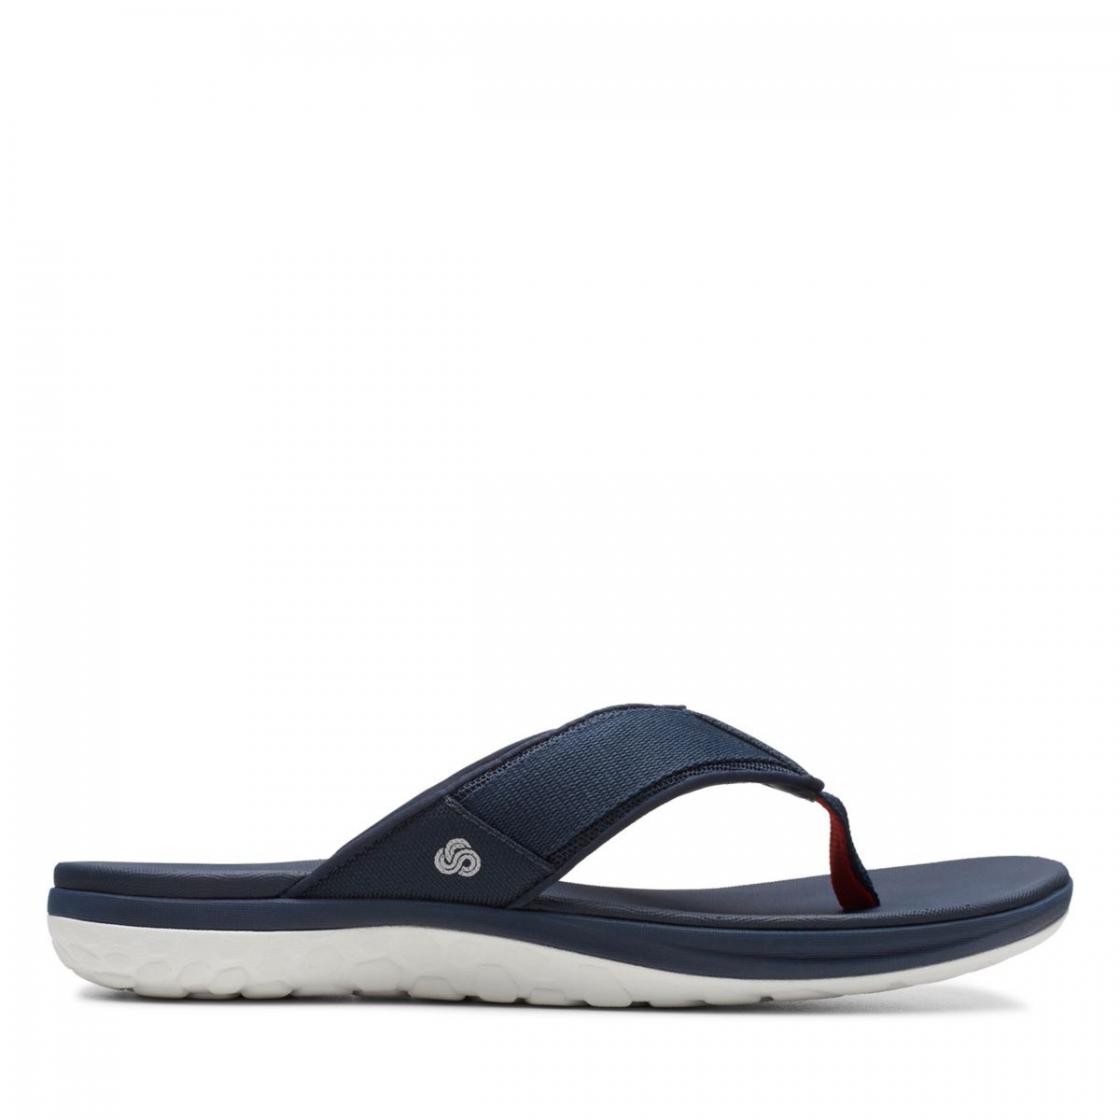 clarks outlet mens slippers